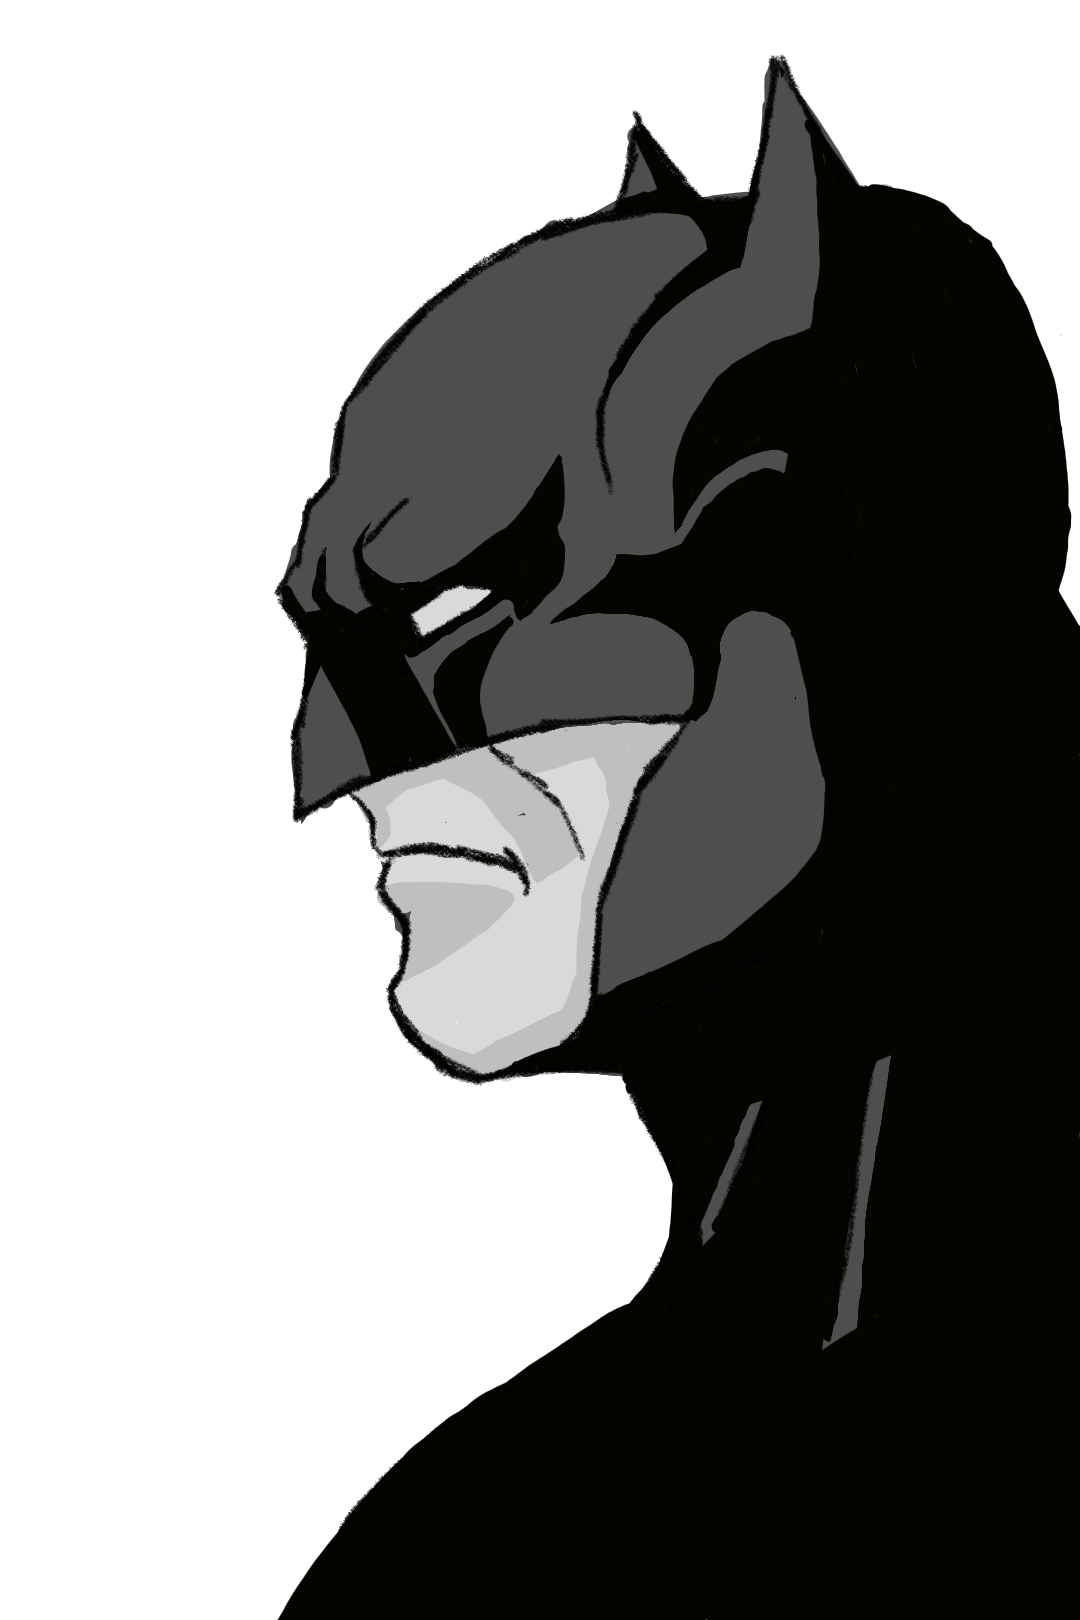 A heavy inking of Batman I drew after watching the first trailer for the Robert Pattinson film. My first few months in my first corporate gig out of college, this is how I would relieve stress - by doodling incessantly.